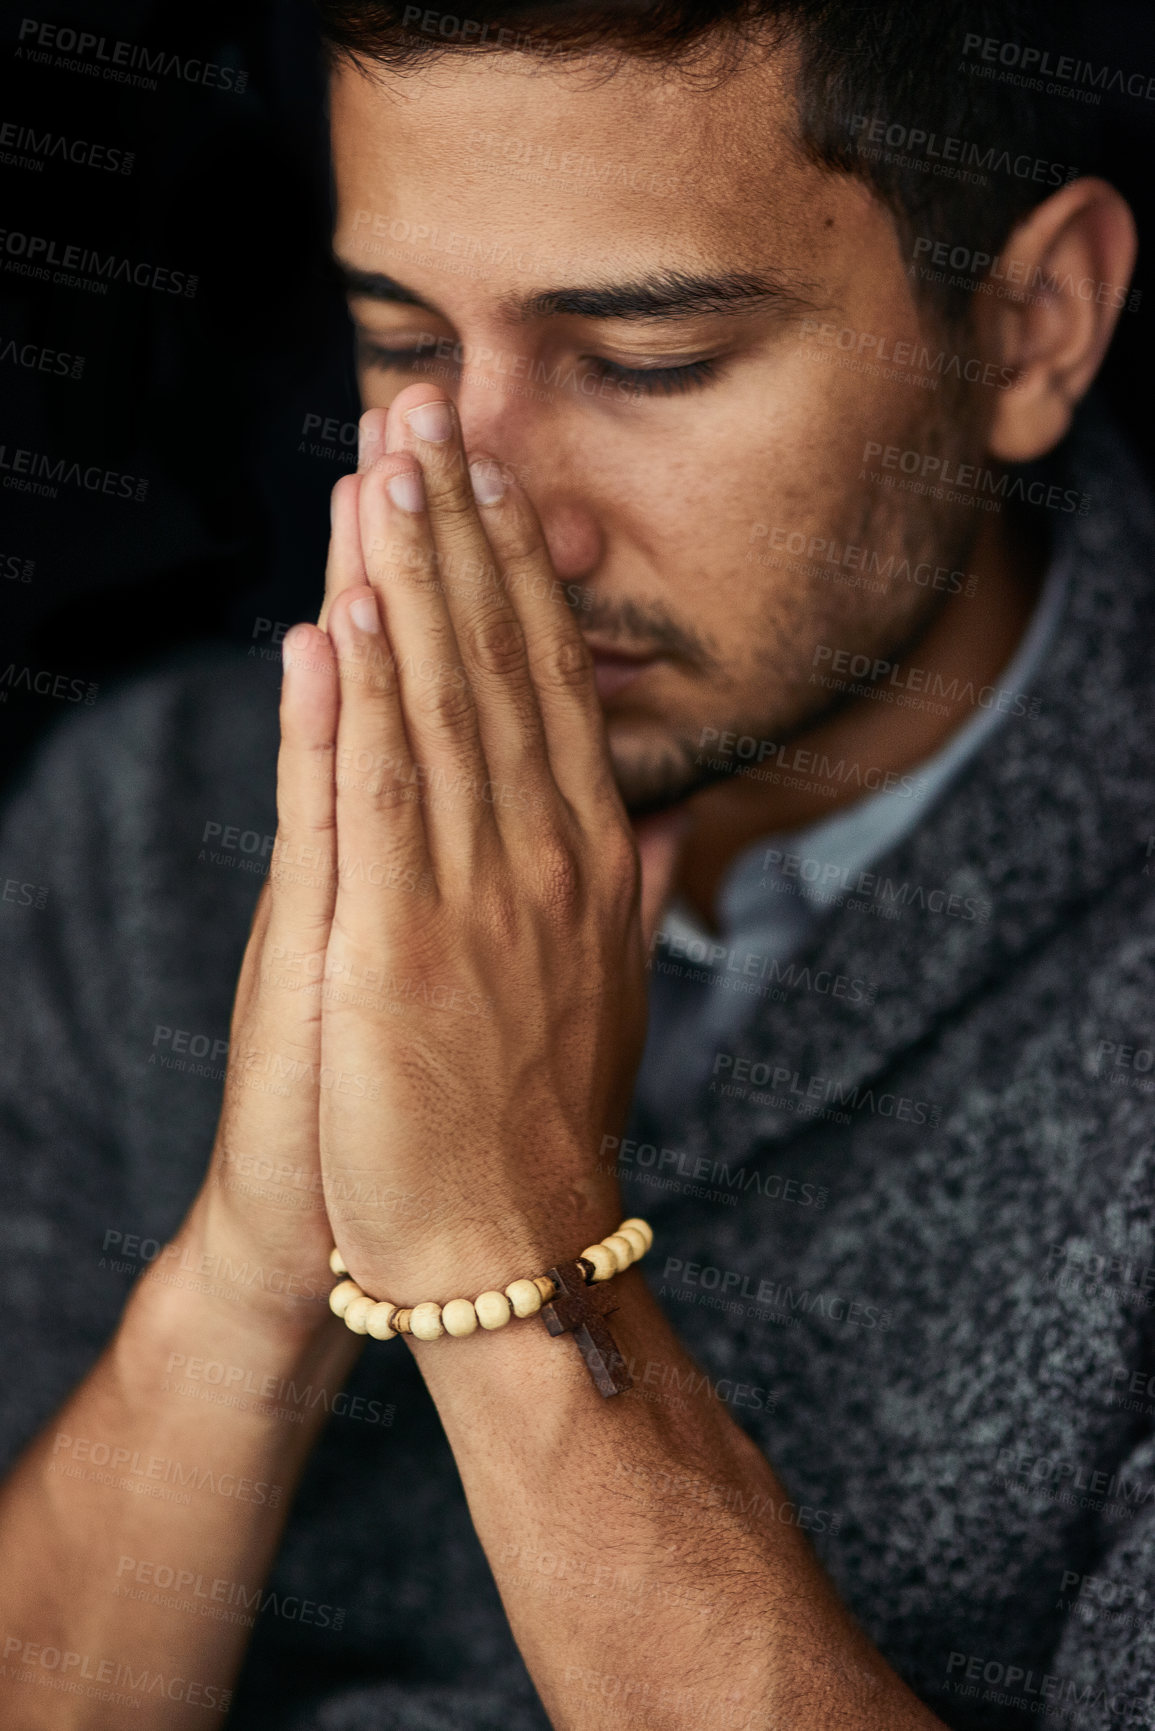 Buy stock photo Closeup shot of a young man praying with his eyes closed